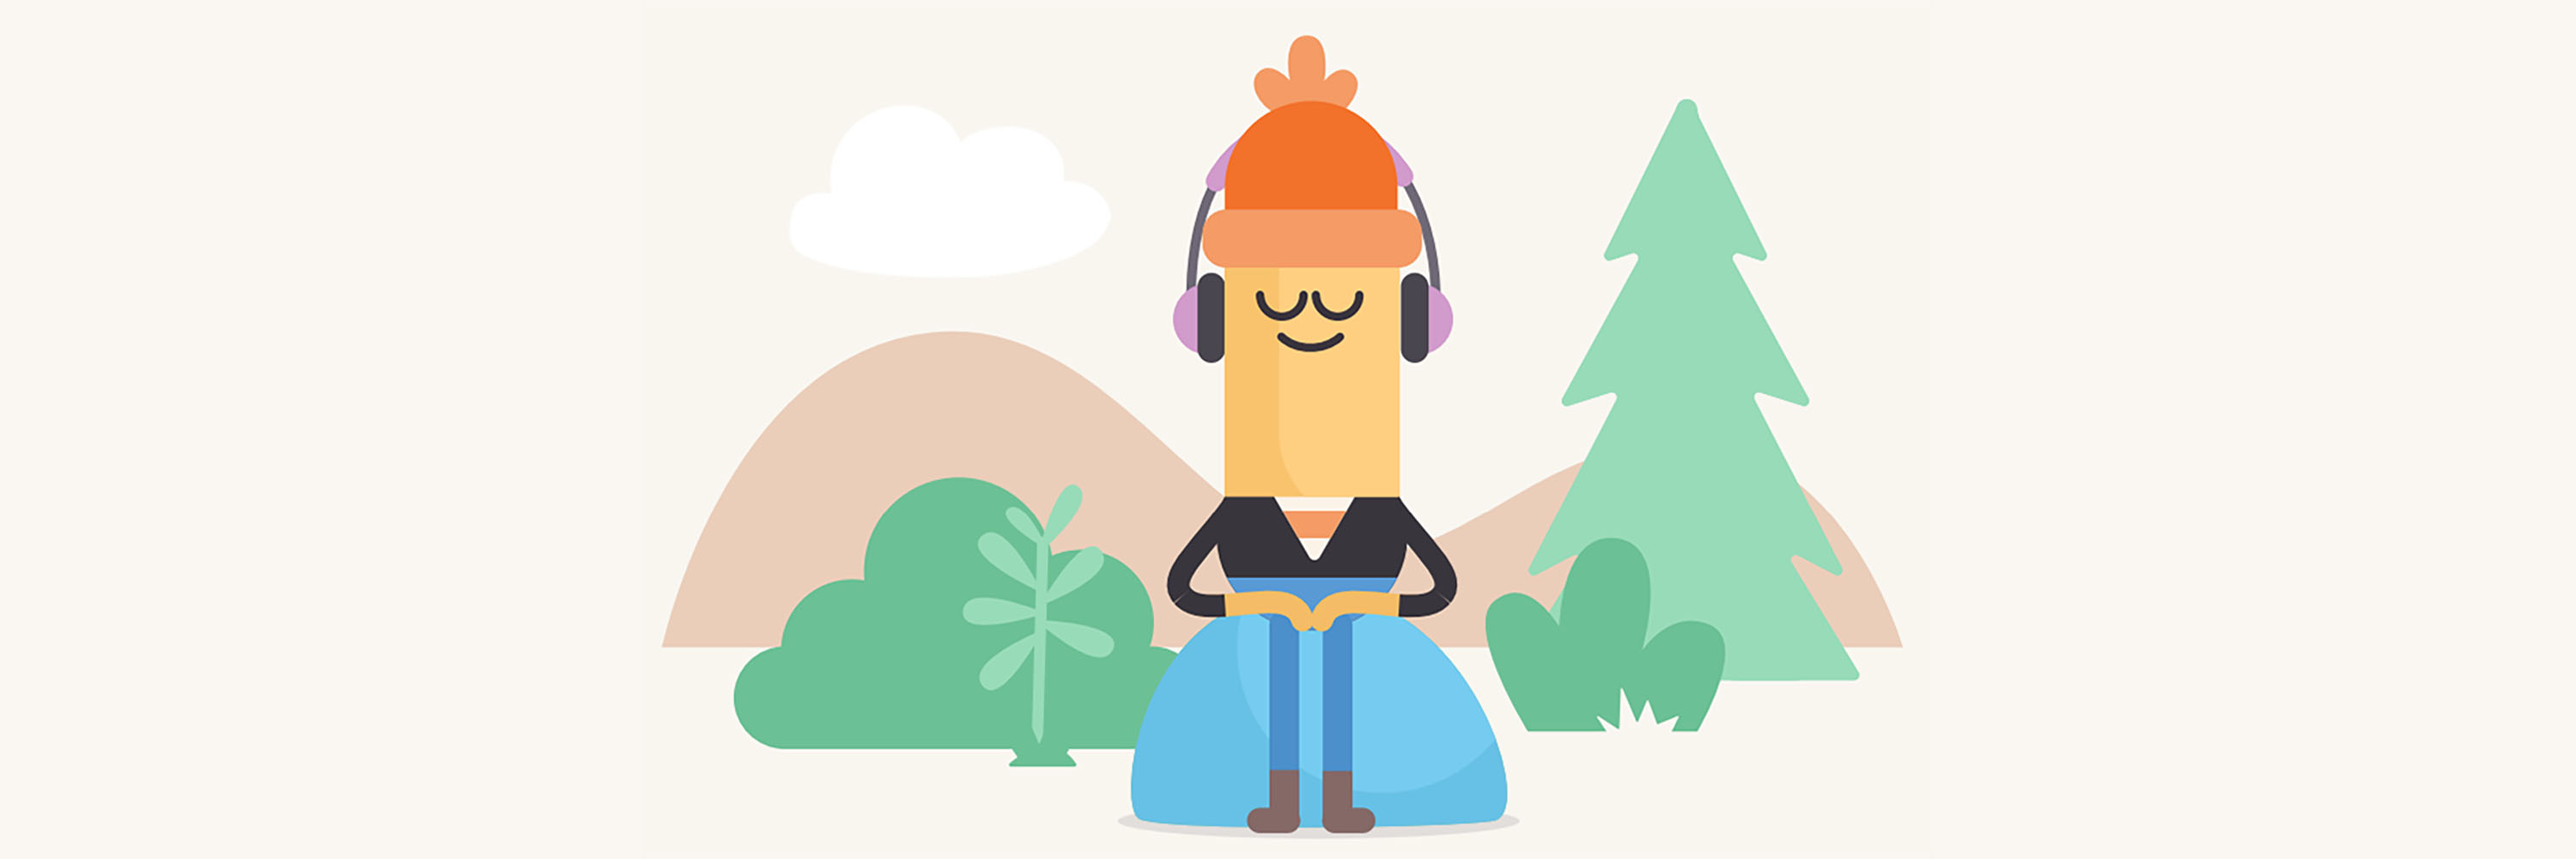 How to Calm Down - Headspace